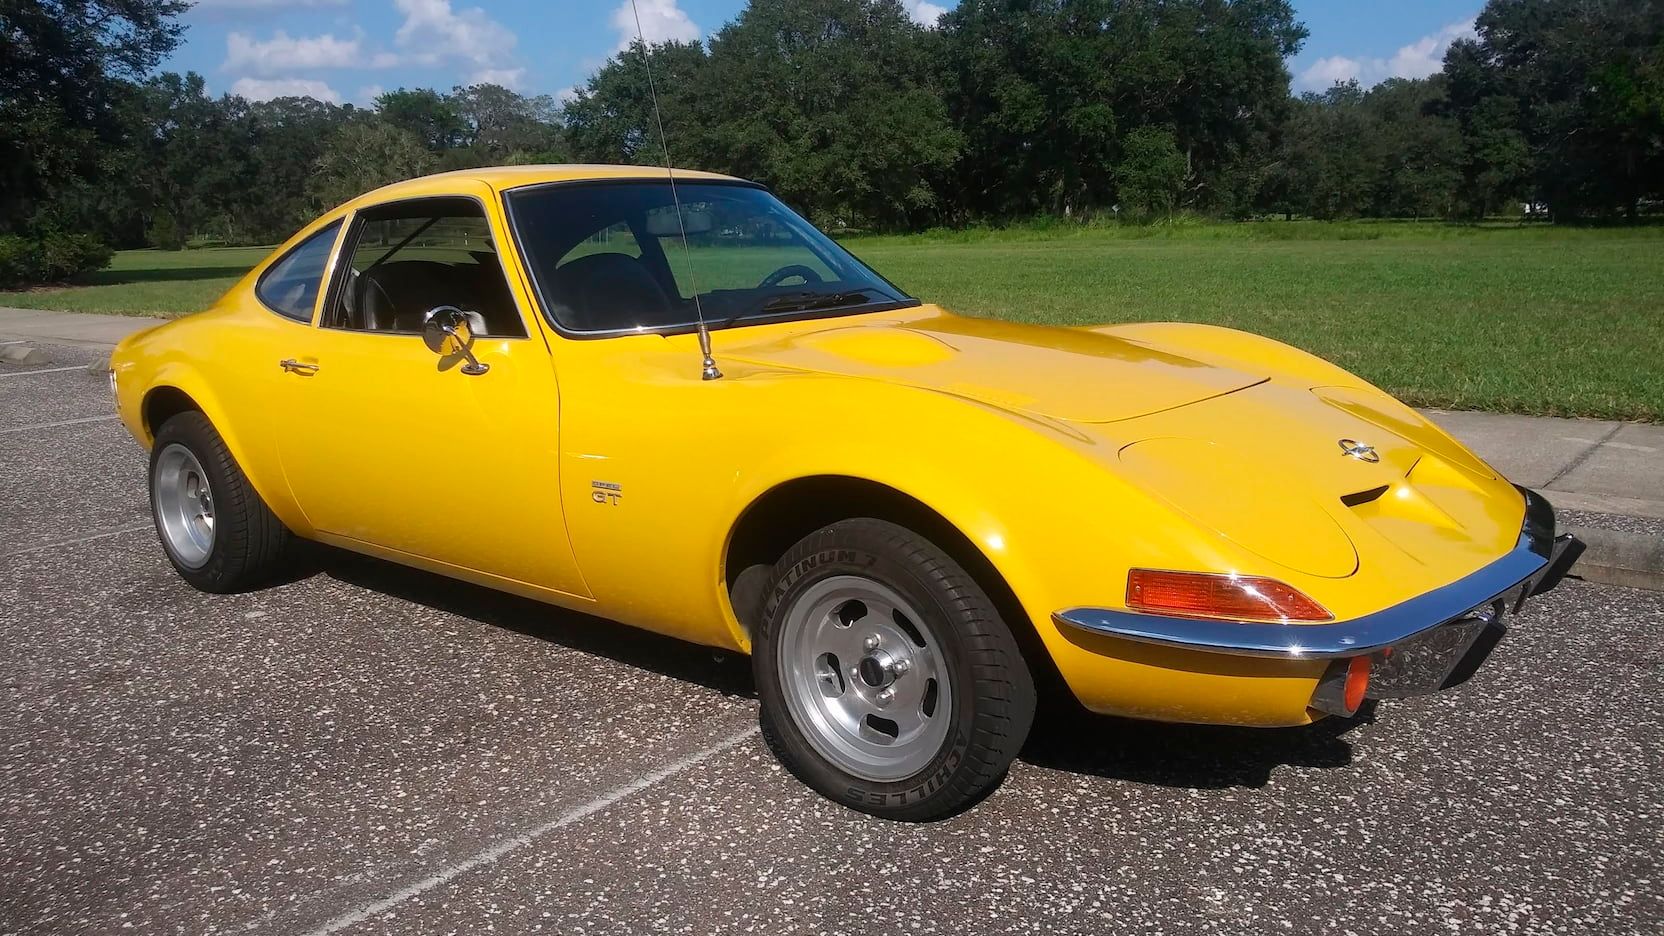 1968 Opel GT: The sports car dubbed as the baby Corvette.